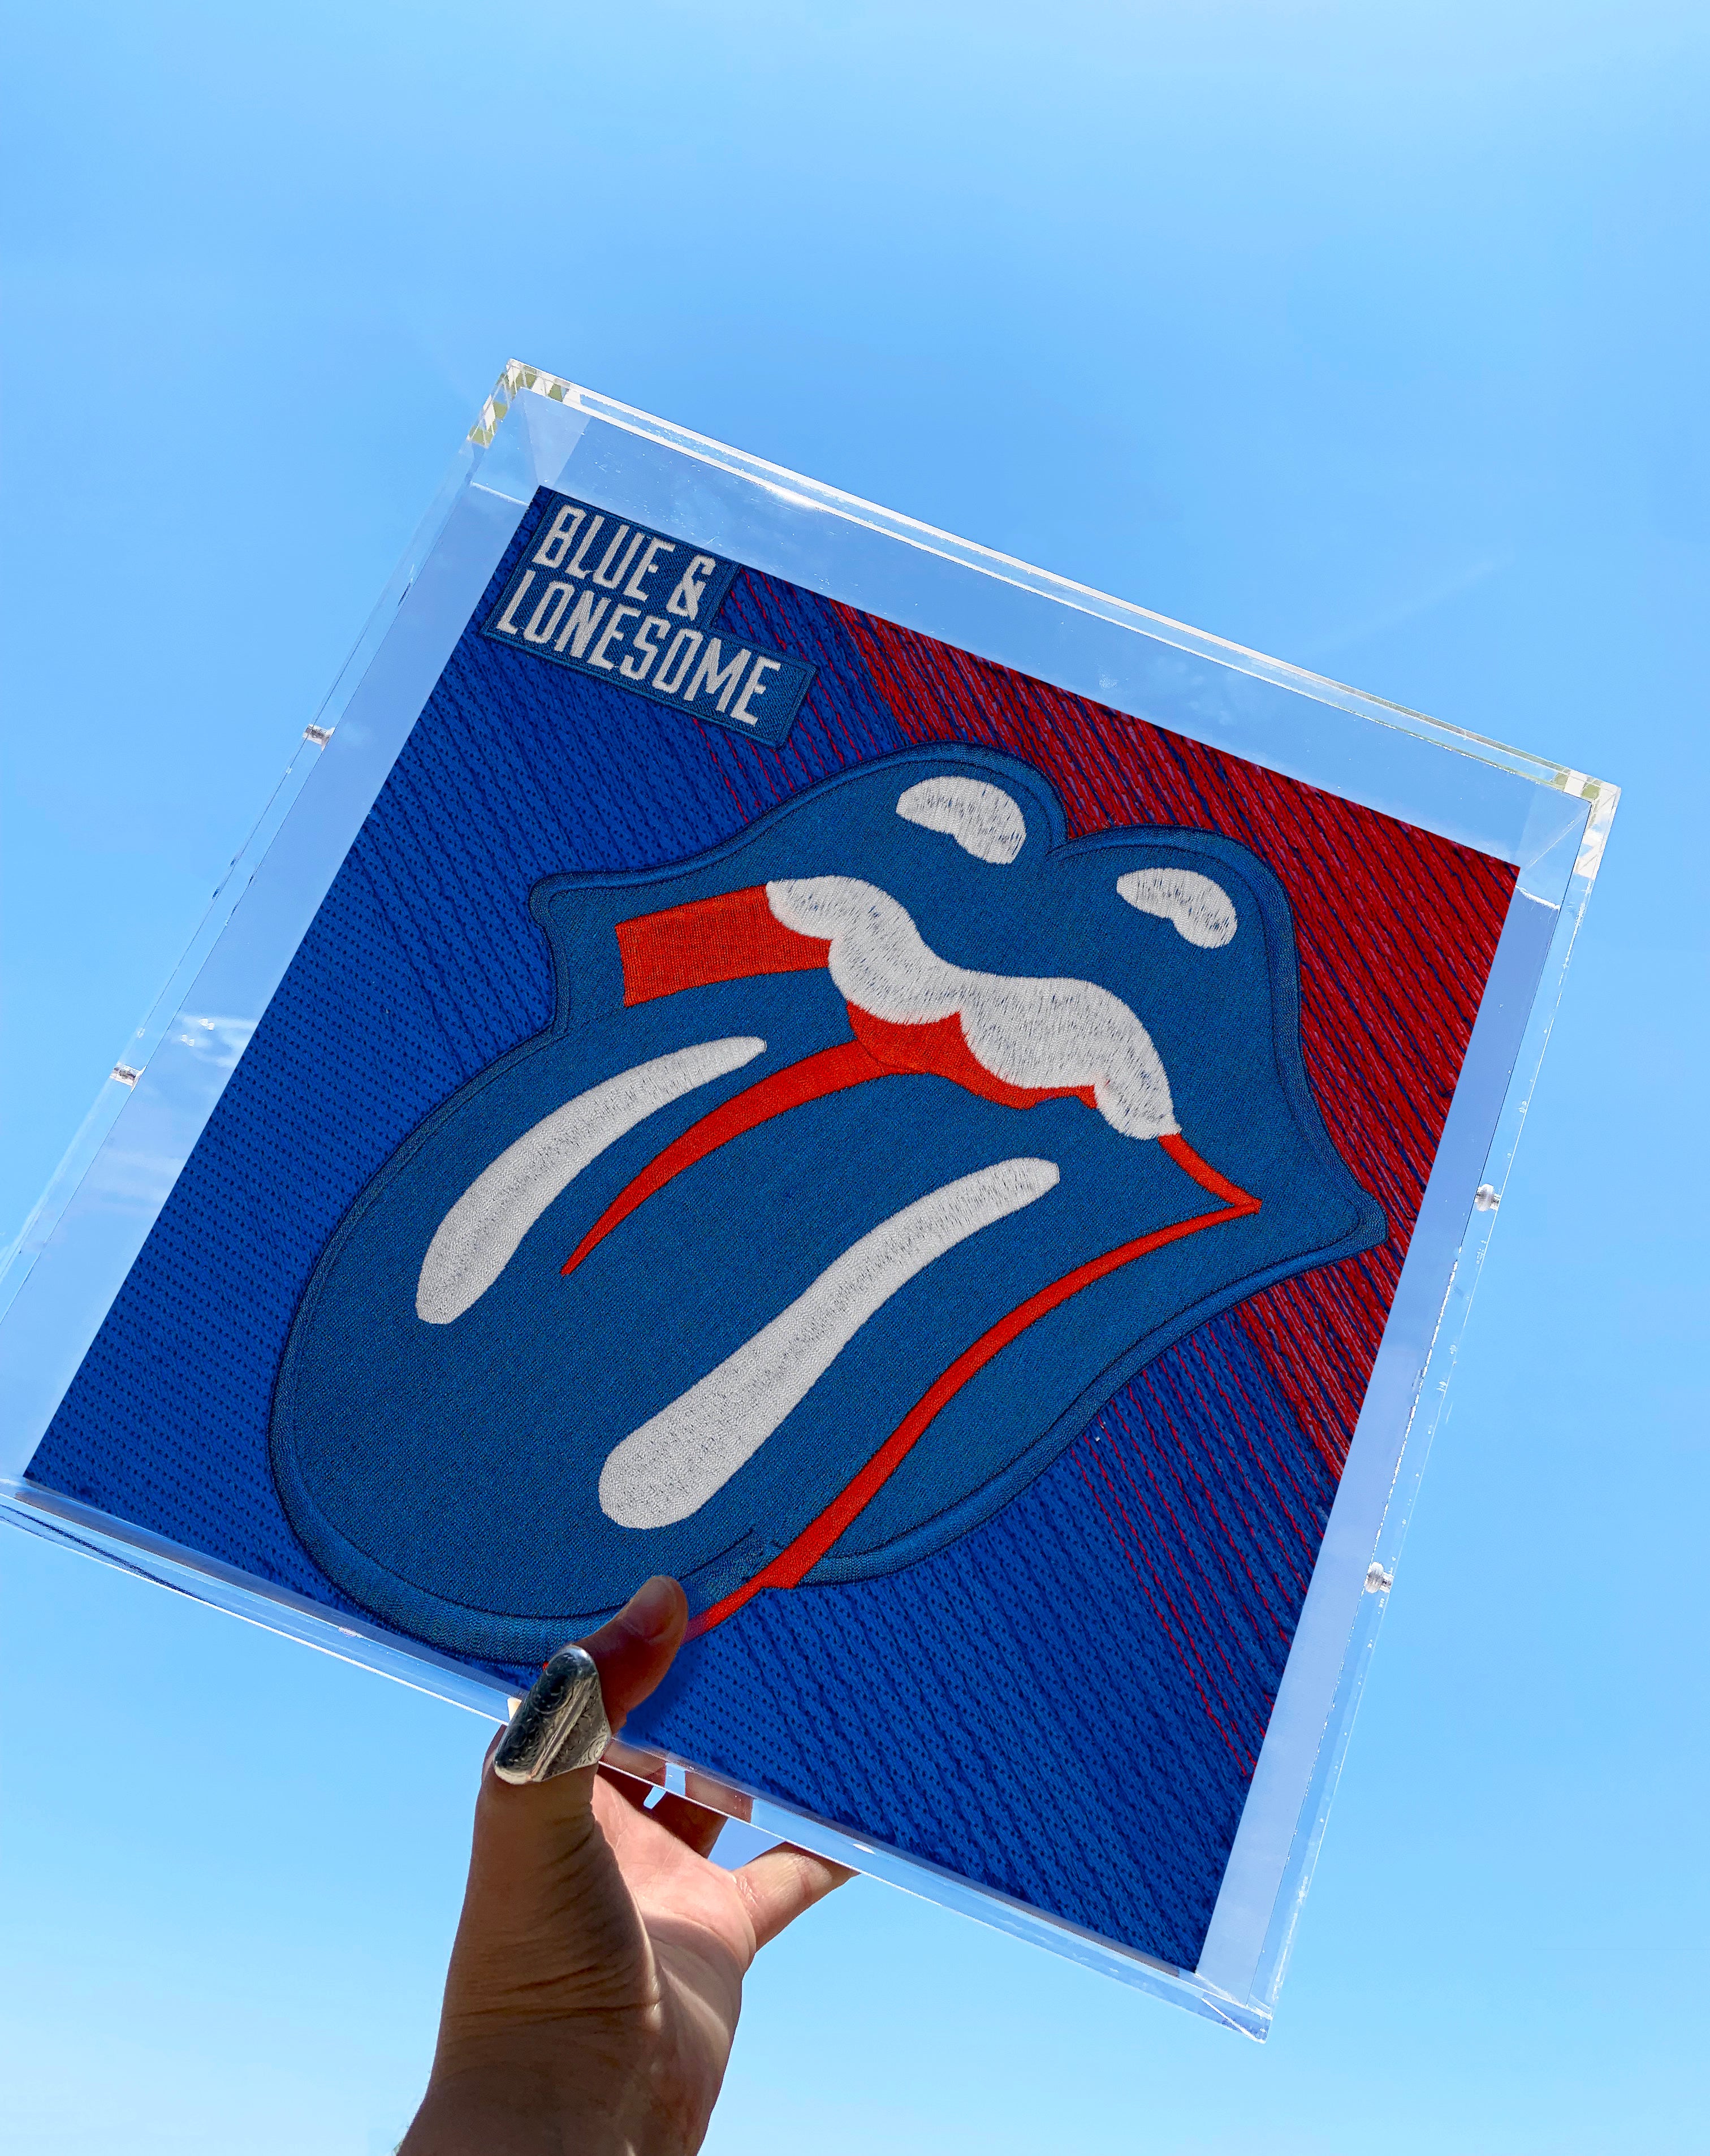 Blue & Lonesome, Rolling Stones by Stephen Wilson (12x12x2")